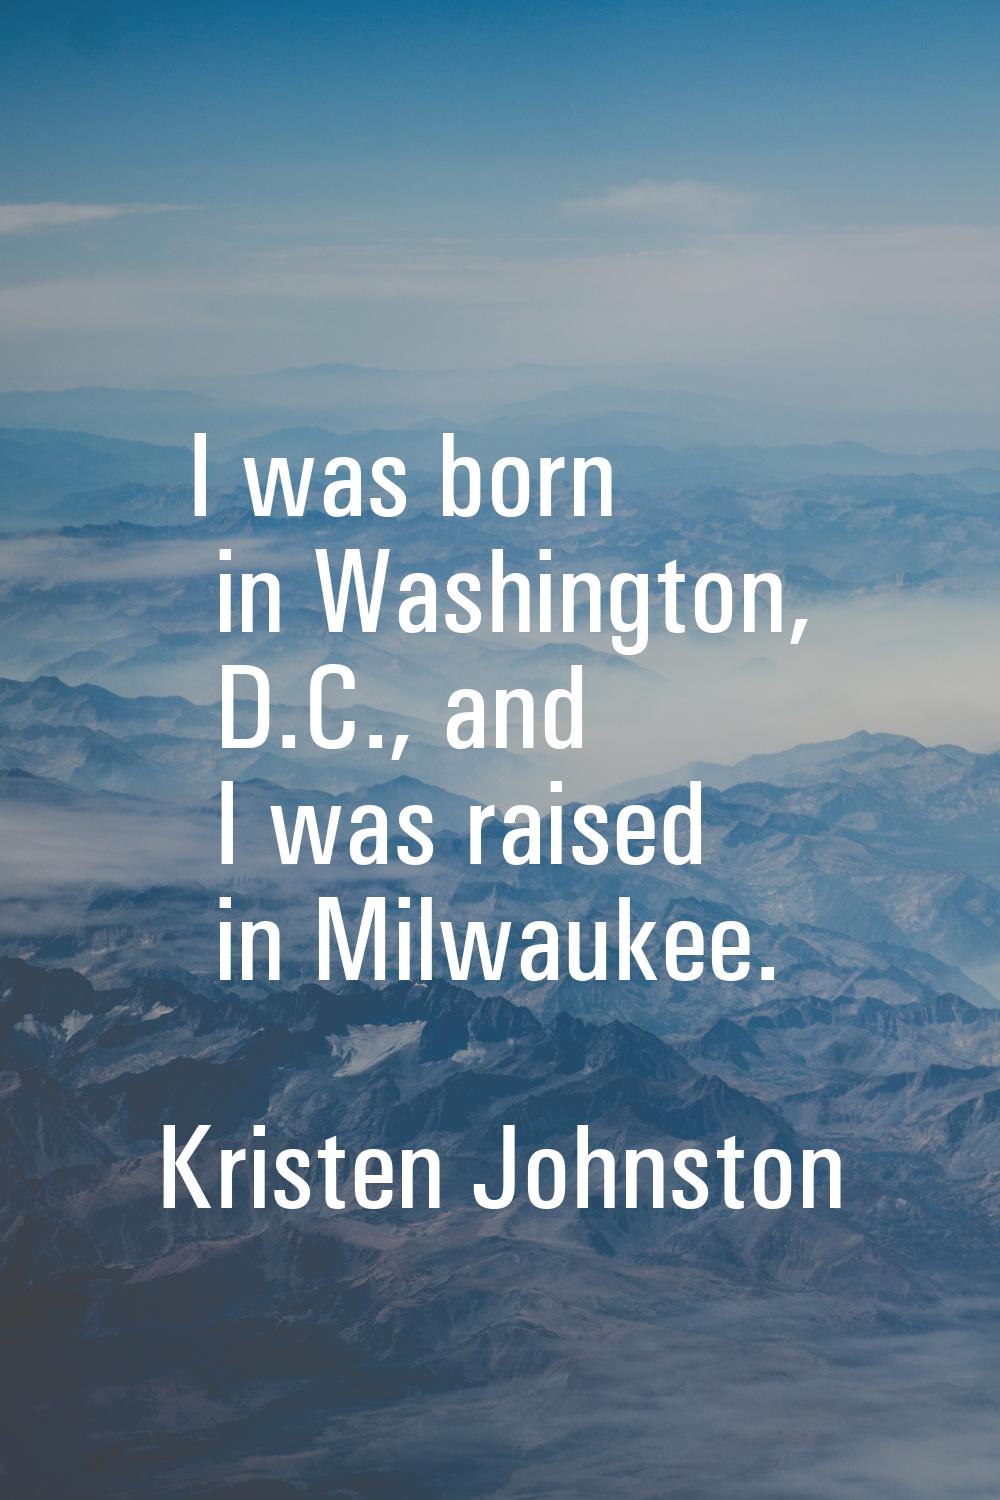 I was born in Washington, D.C., and I was raised in Milwaukee.